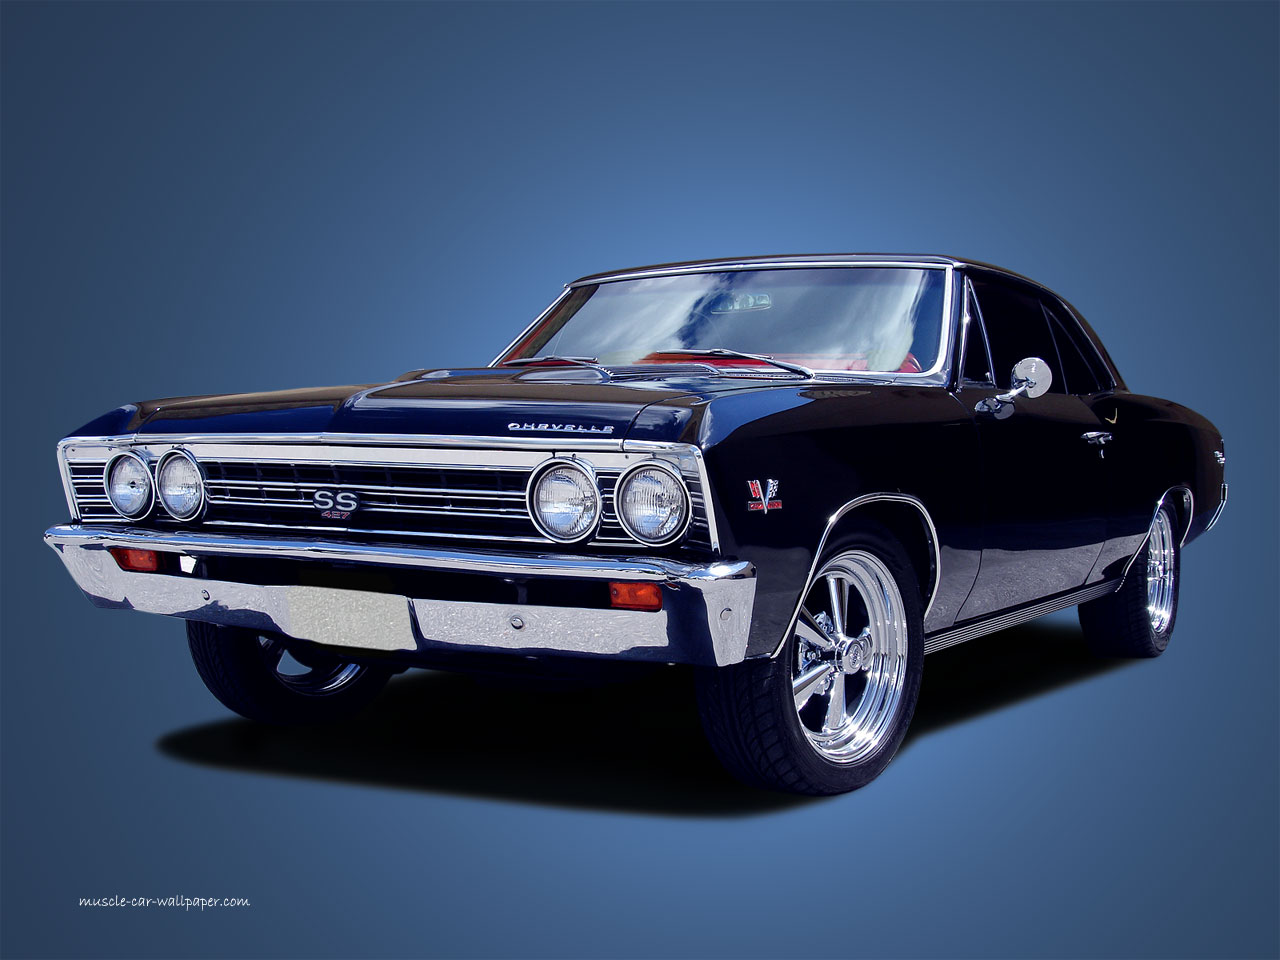 Chevelle SS Wallpaper 1967 Coupe 1280x960 07 1280x960